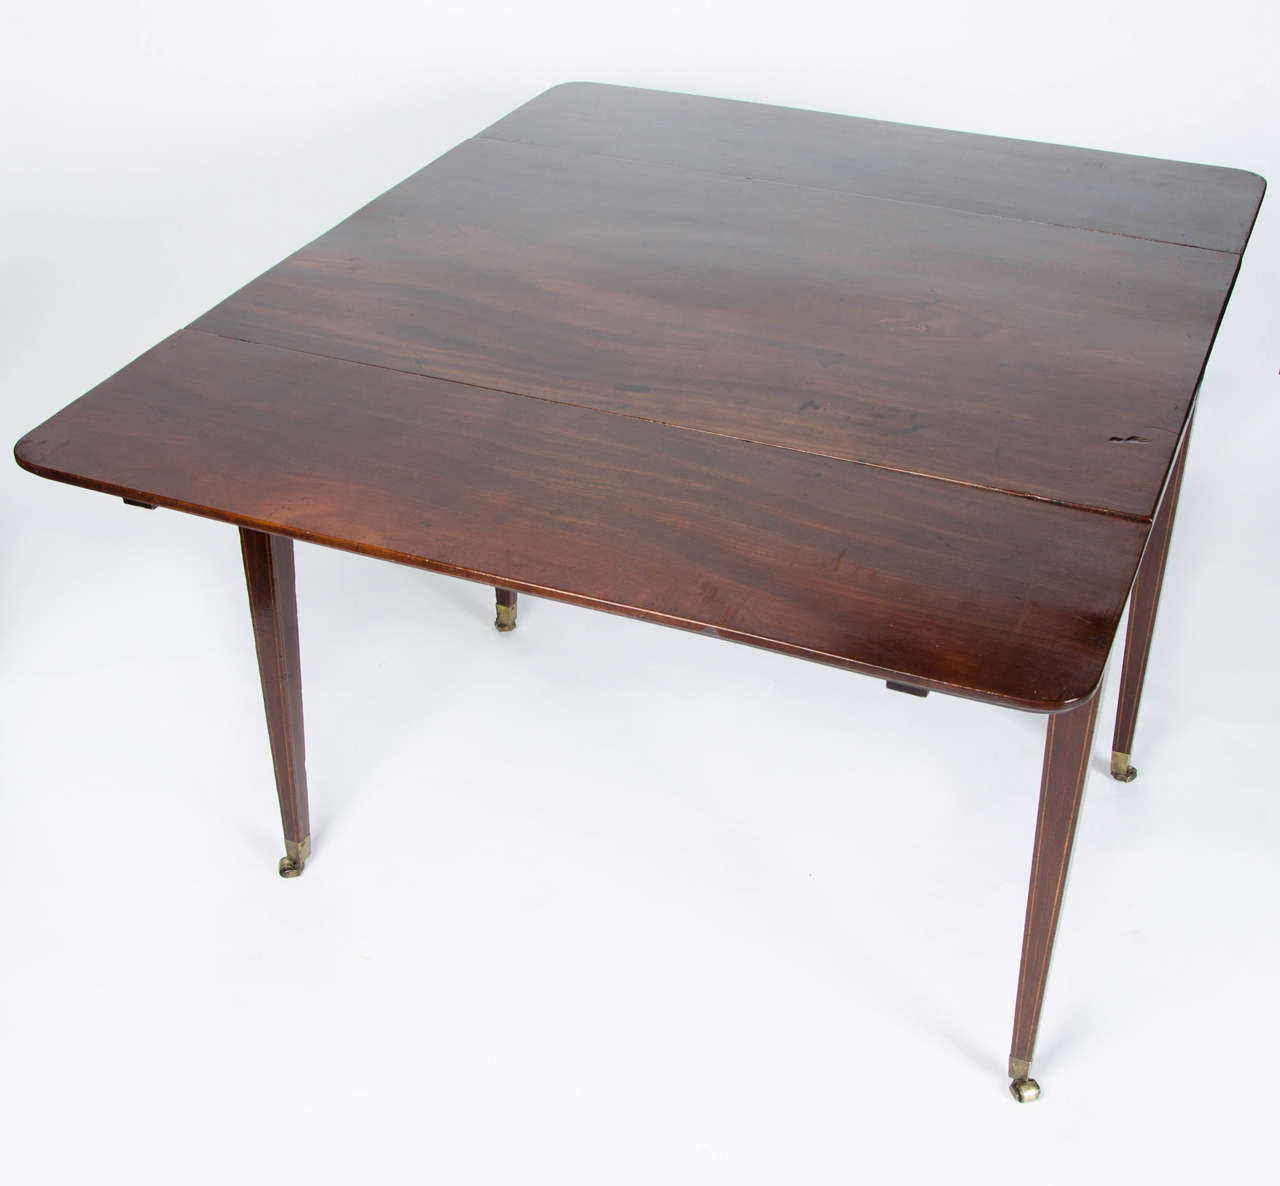 Late 18th Century Mahogany Draw Leaf Table to a Design by Thomas Sheraton For Sale 2